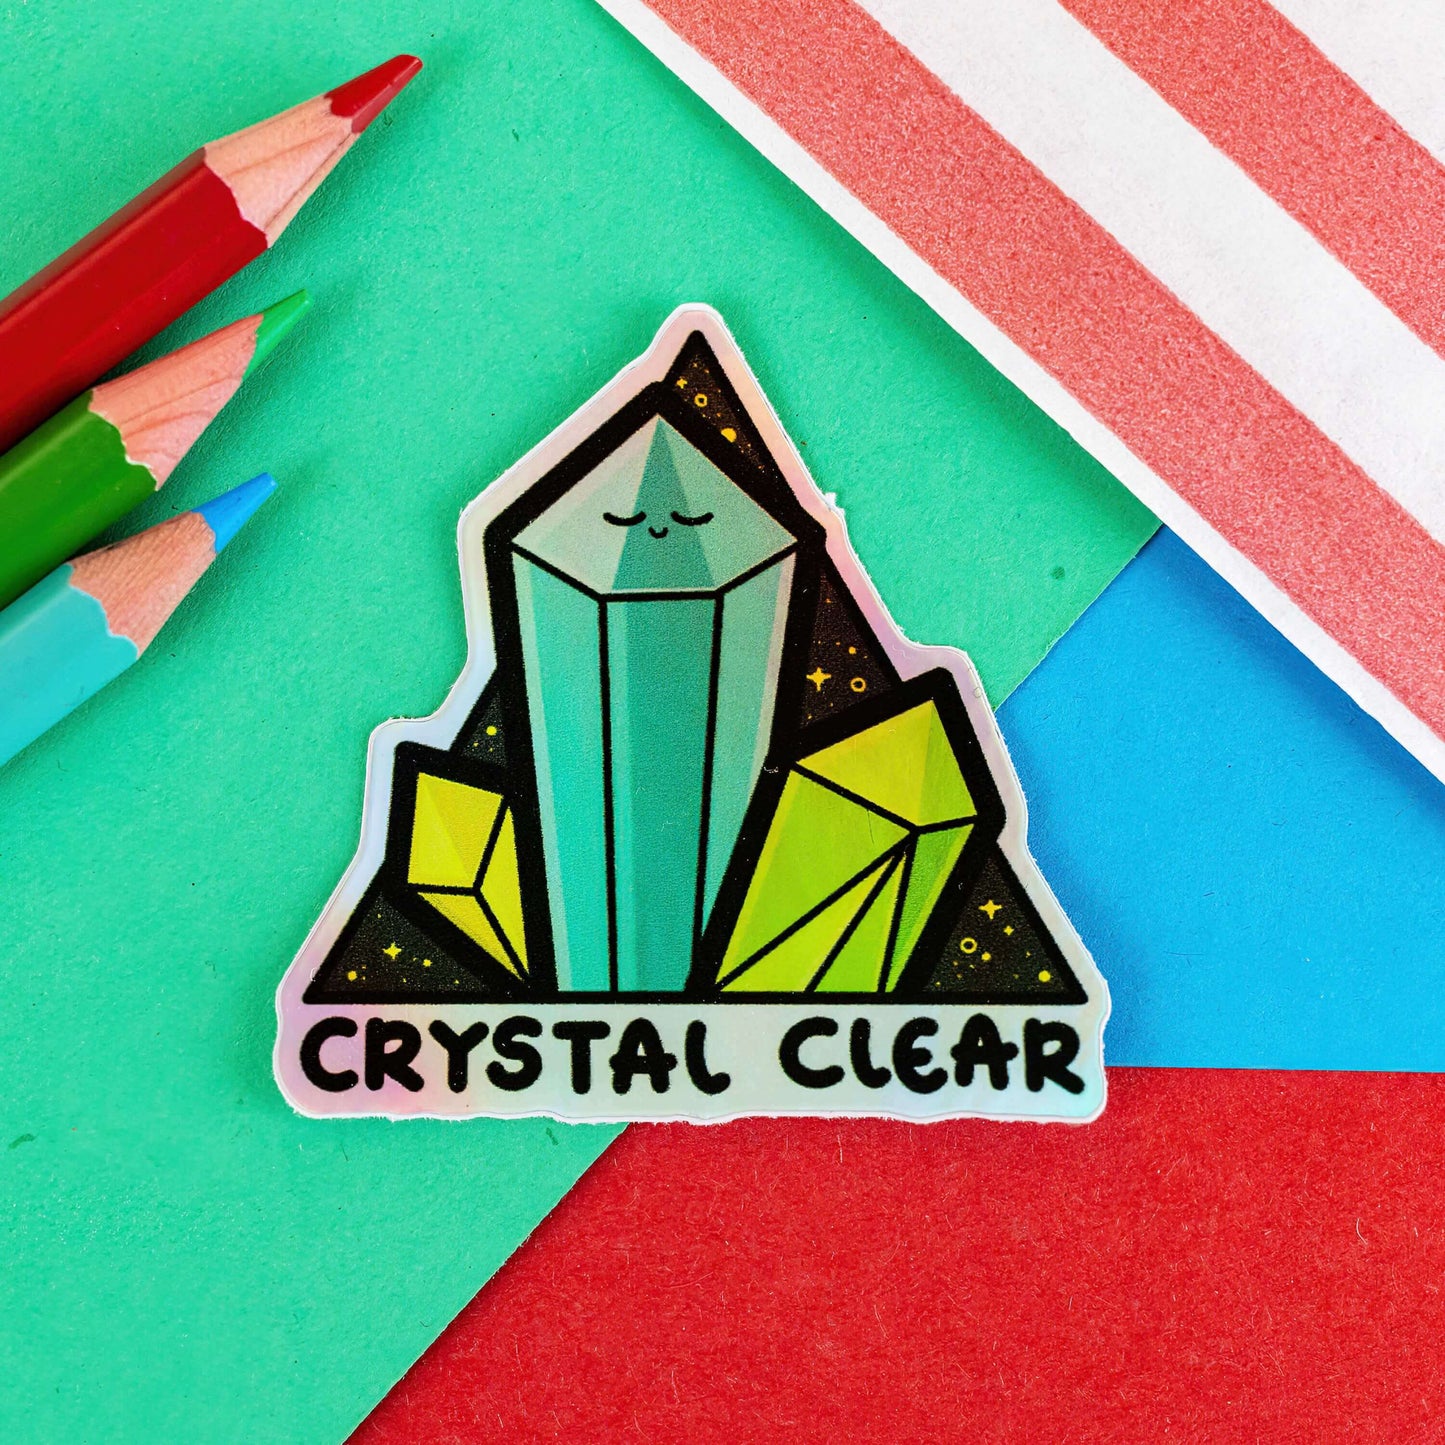 The Crystal Clear Holographic Sticker on a red, green and blue background with colouring pencils and a red stripe candy bag. The triangle shaped sticker features three green crystal towers on a black sparkly background with bottom text reading crystal clear, the centre crystal is smiling. Inspired by witchy spiritual healing with crystals.